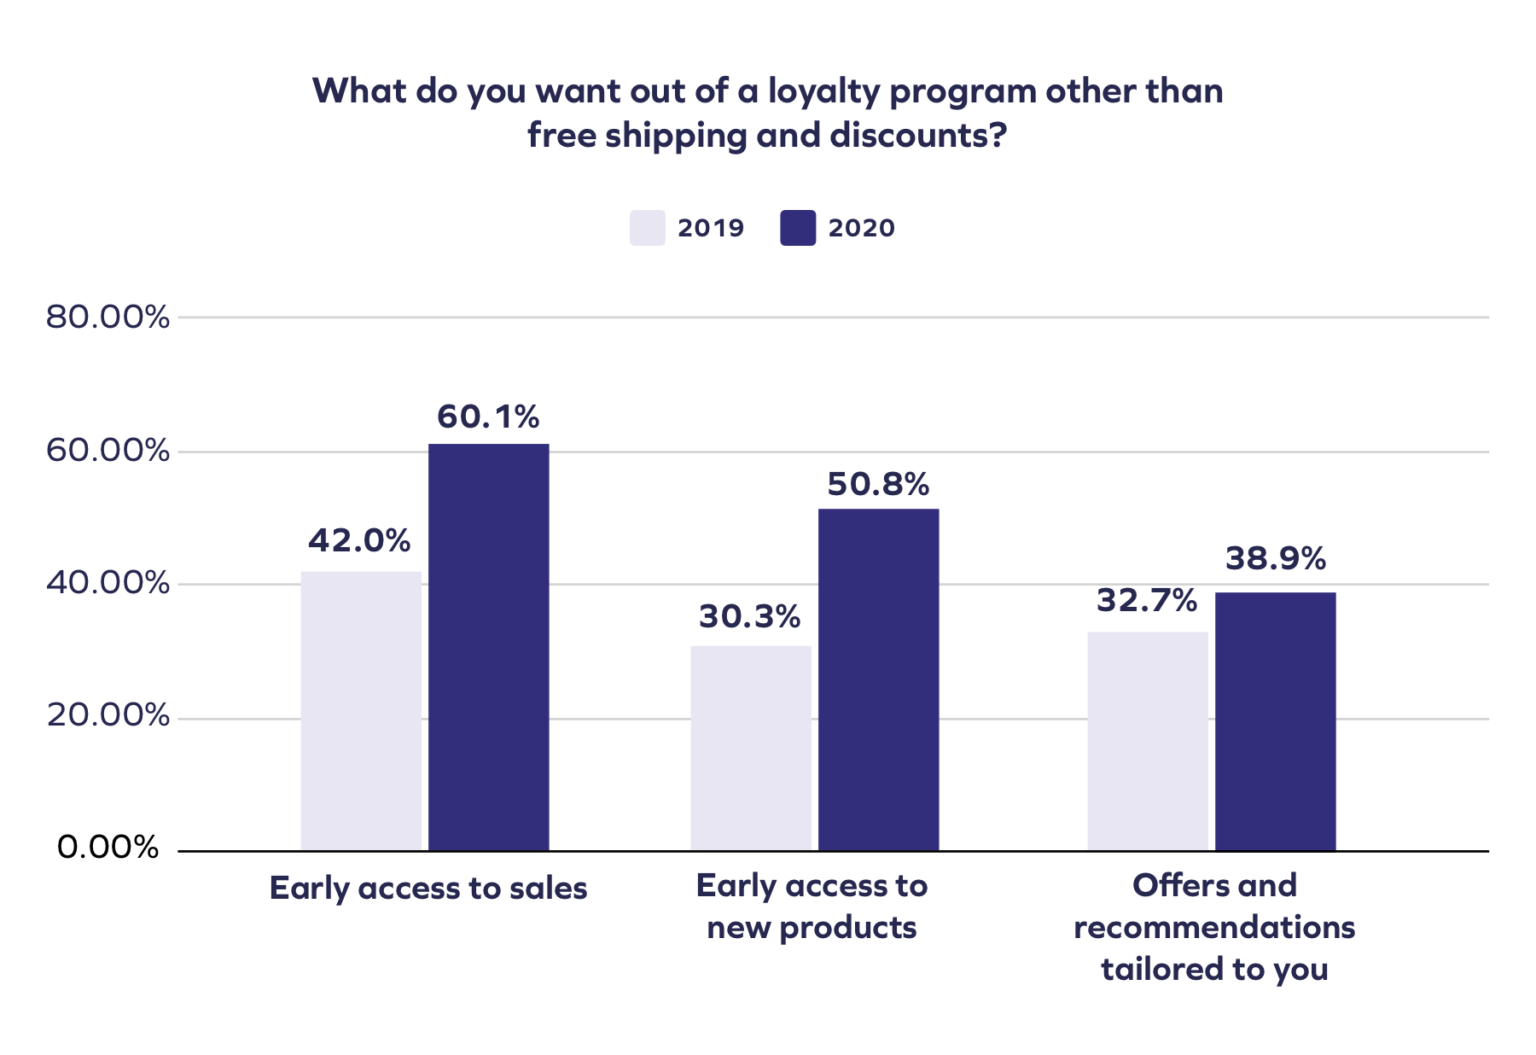 What people want from a loyalty program